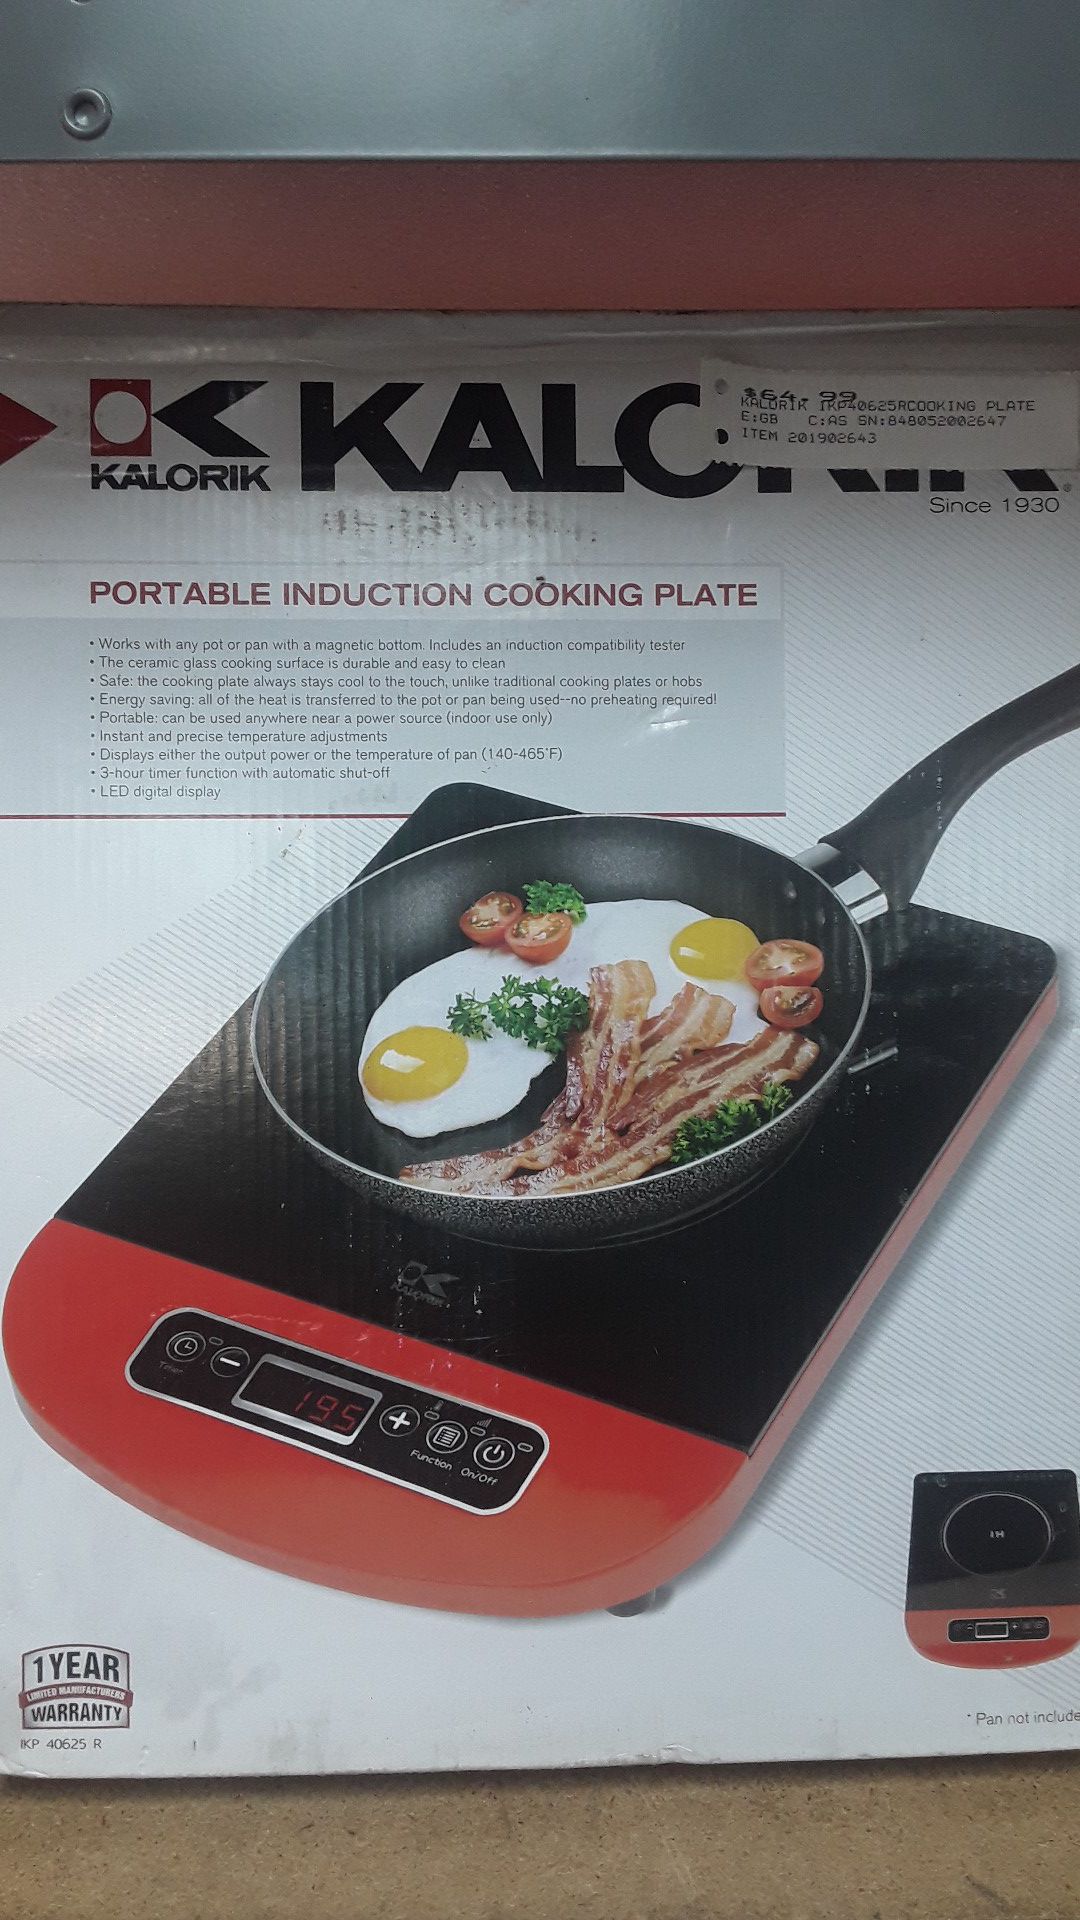 Kalorik Portable Induction Cooking Plate (Pan not included)